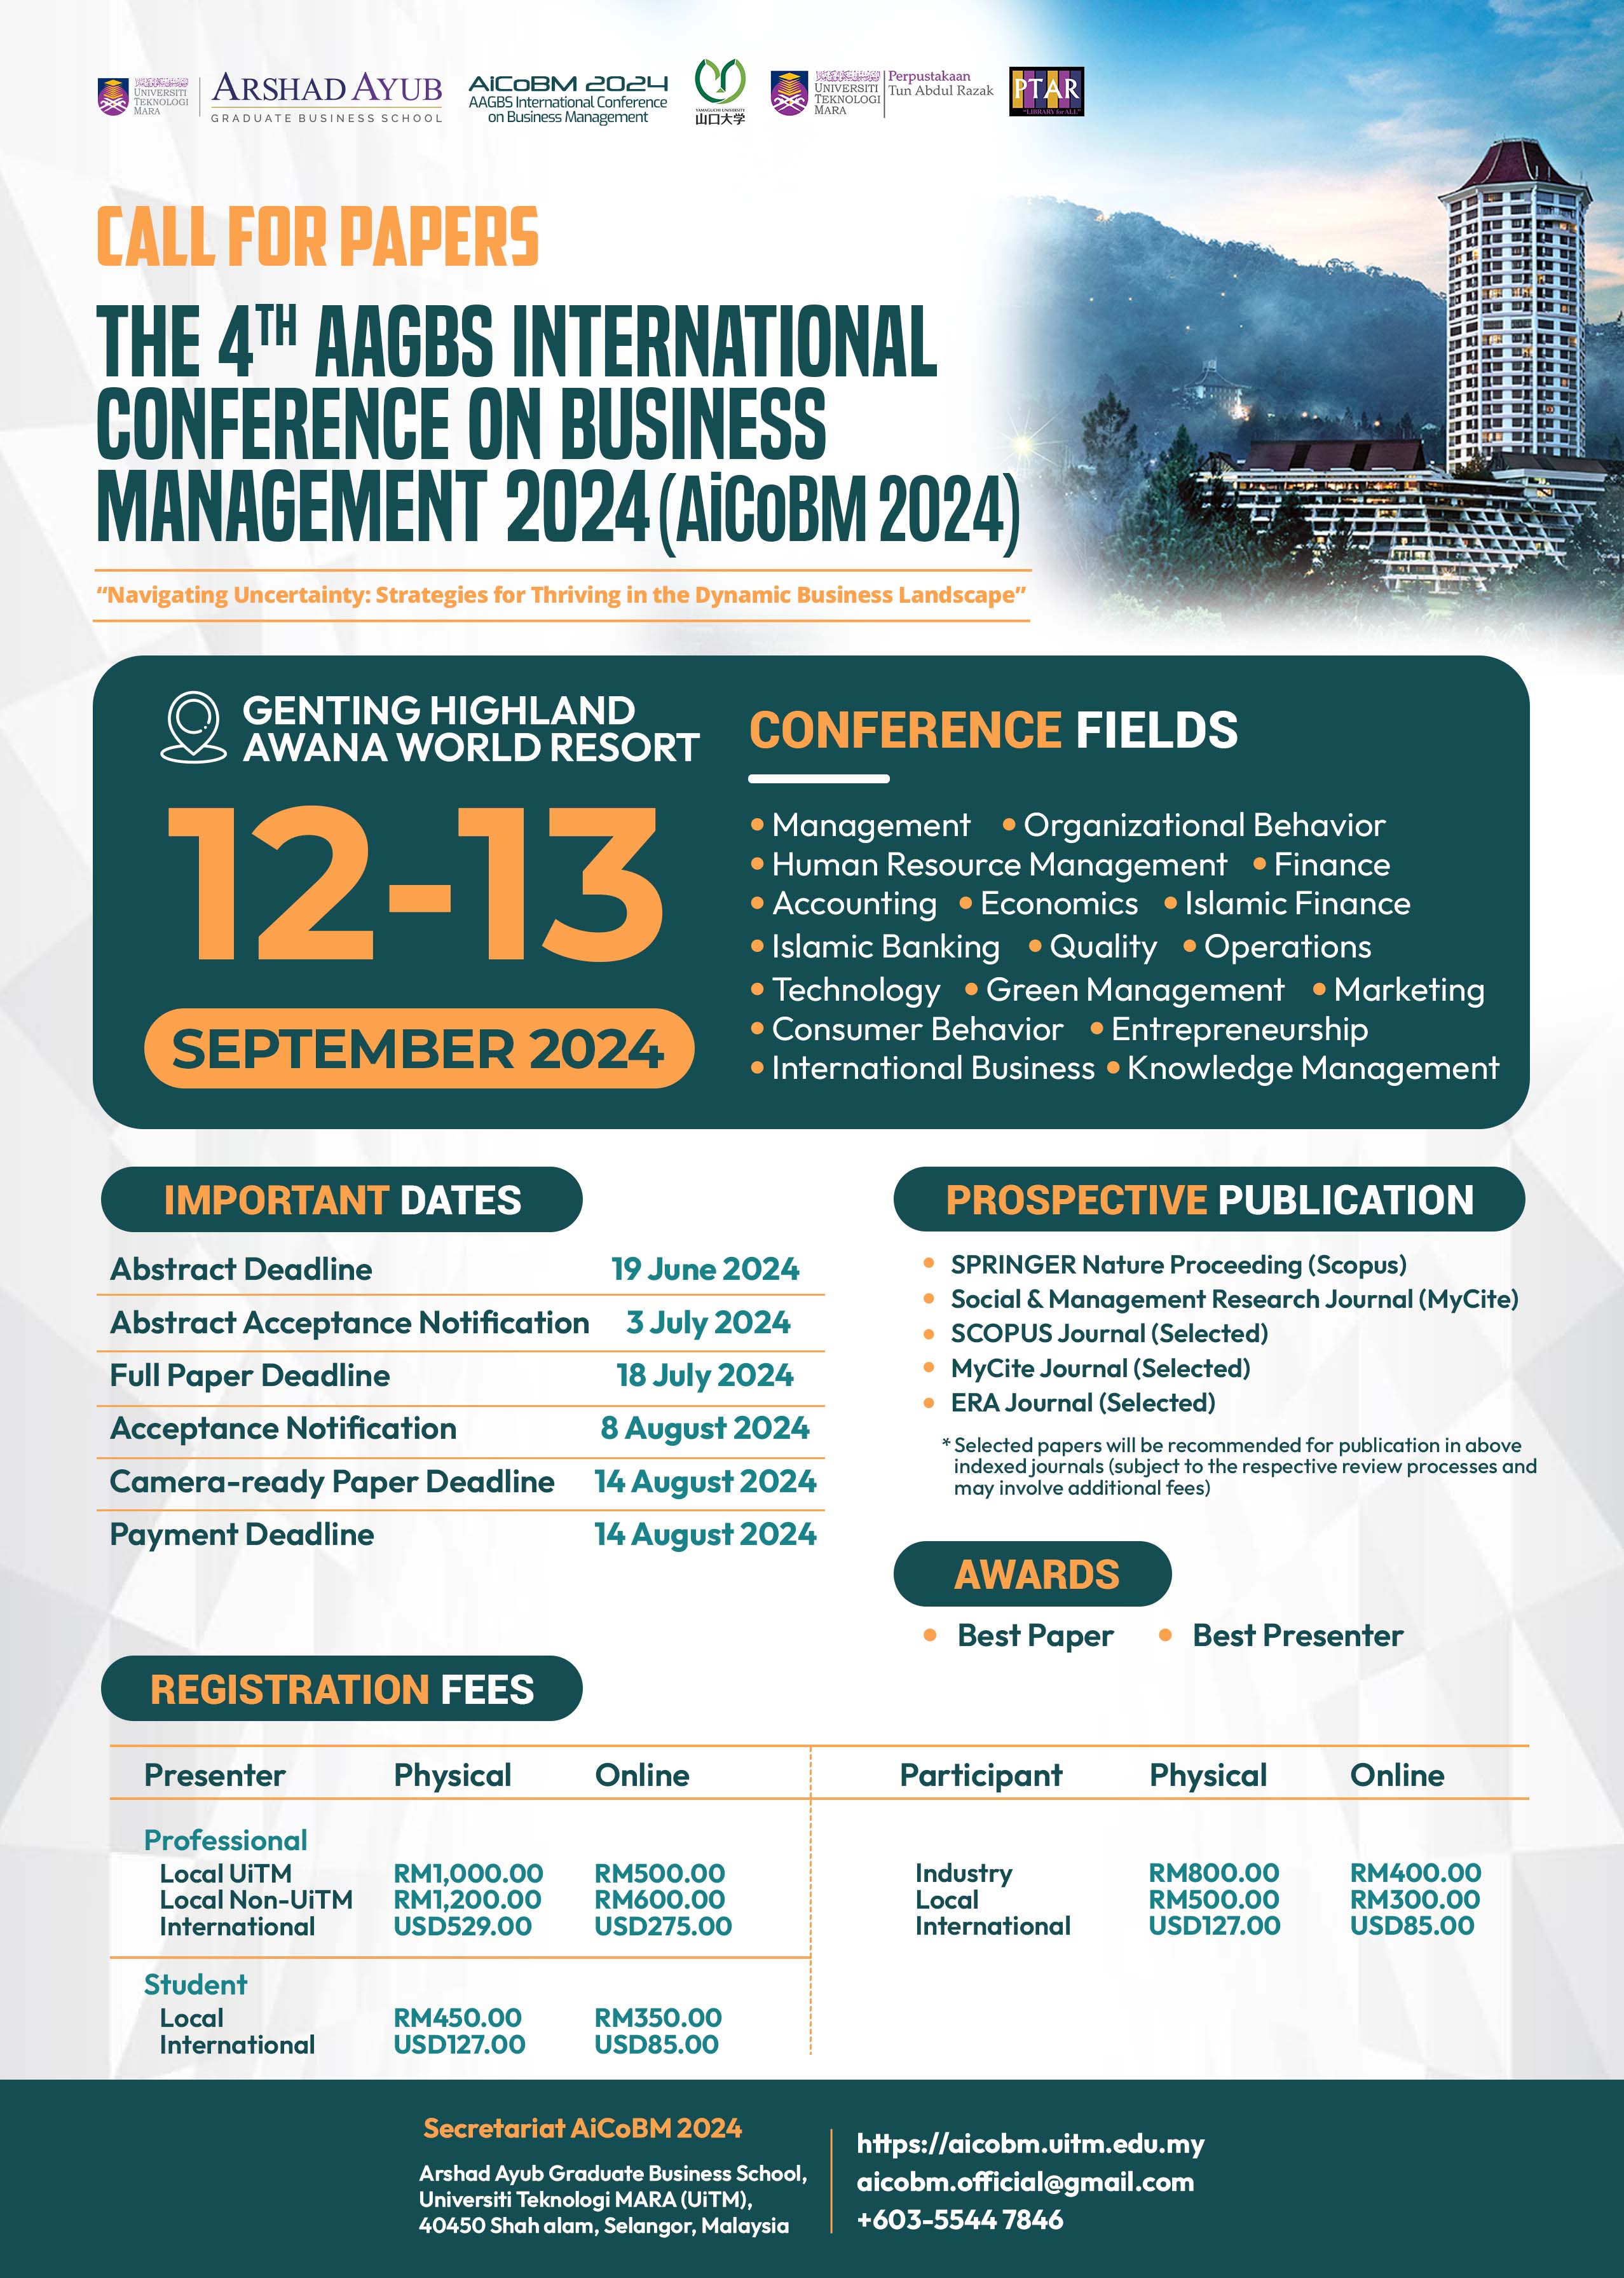 Call For Papers - The 4th AAGBS International Conference On Business Management 2024 (AiCoBM 2024)